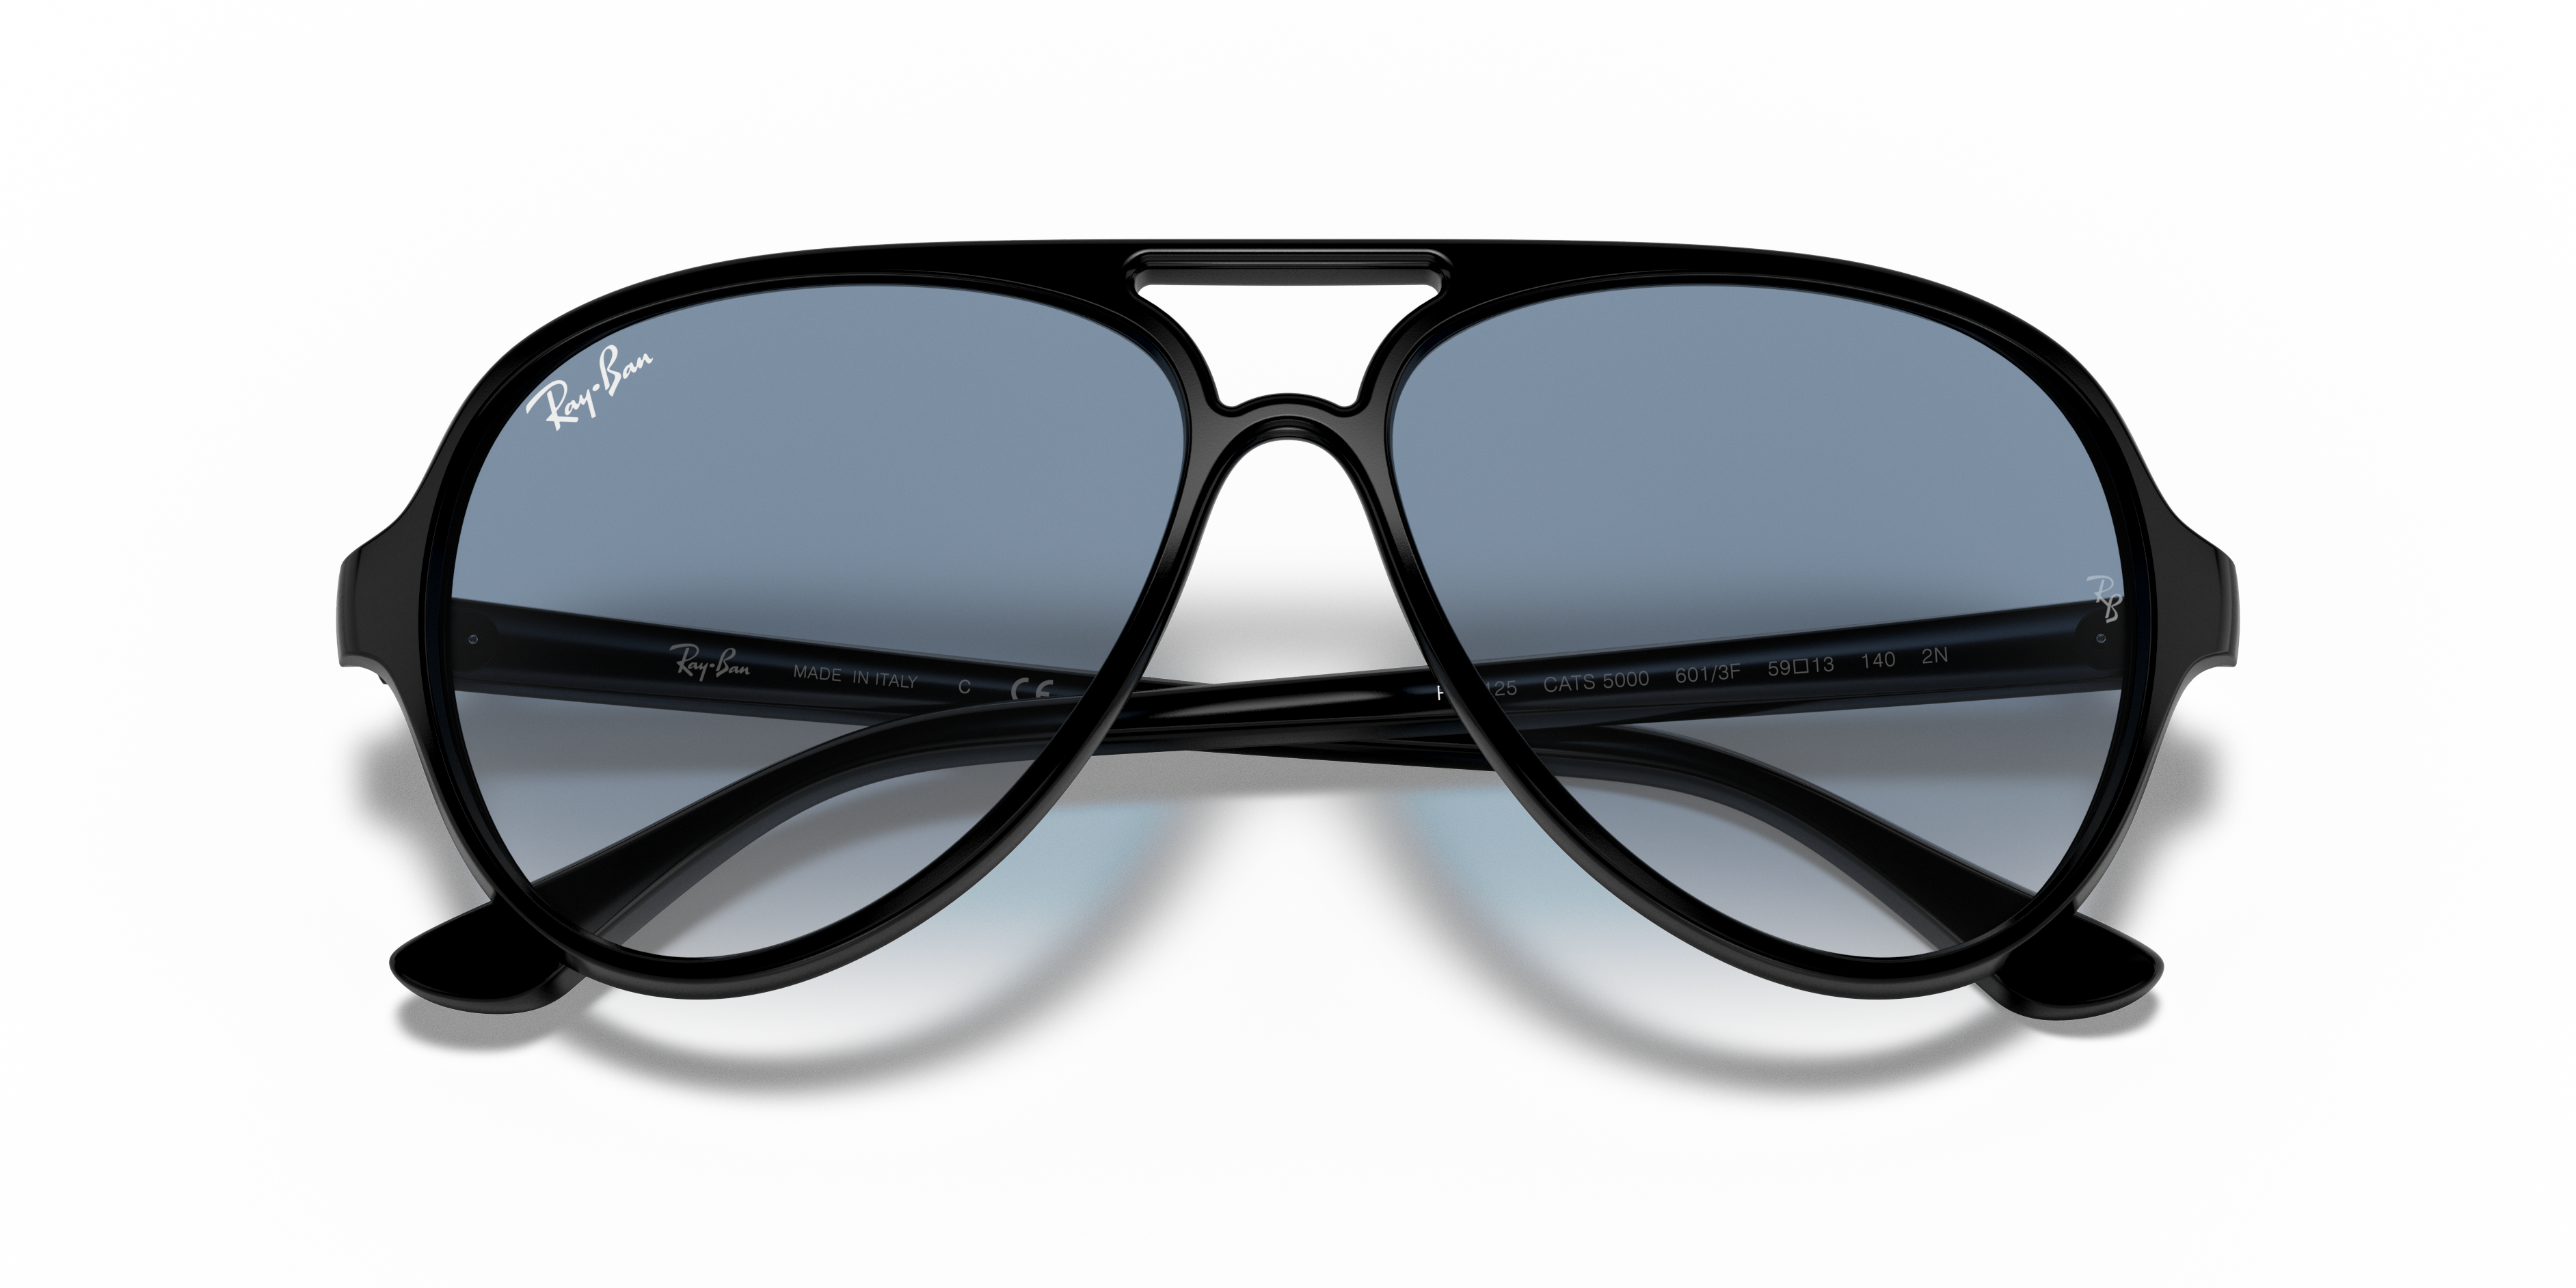 Cats 5000 Classic Sunglasses in Black and Light Blue | Ray-Ban®